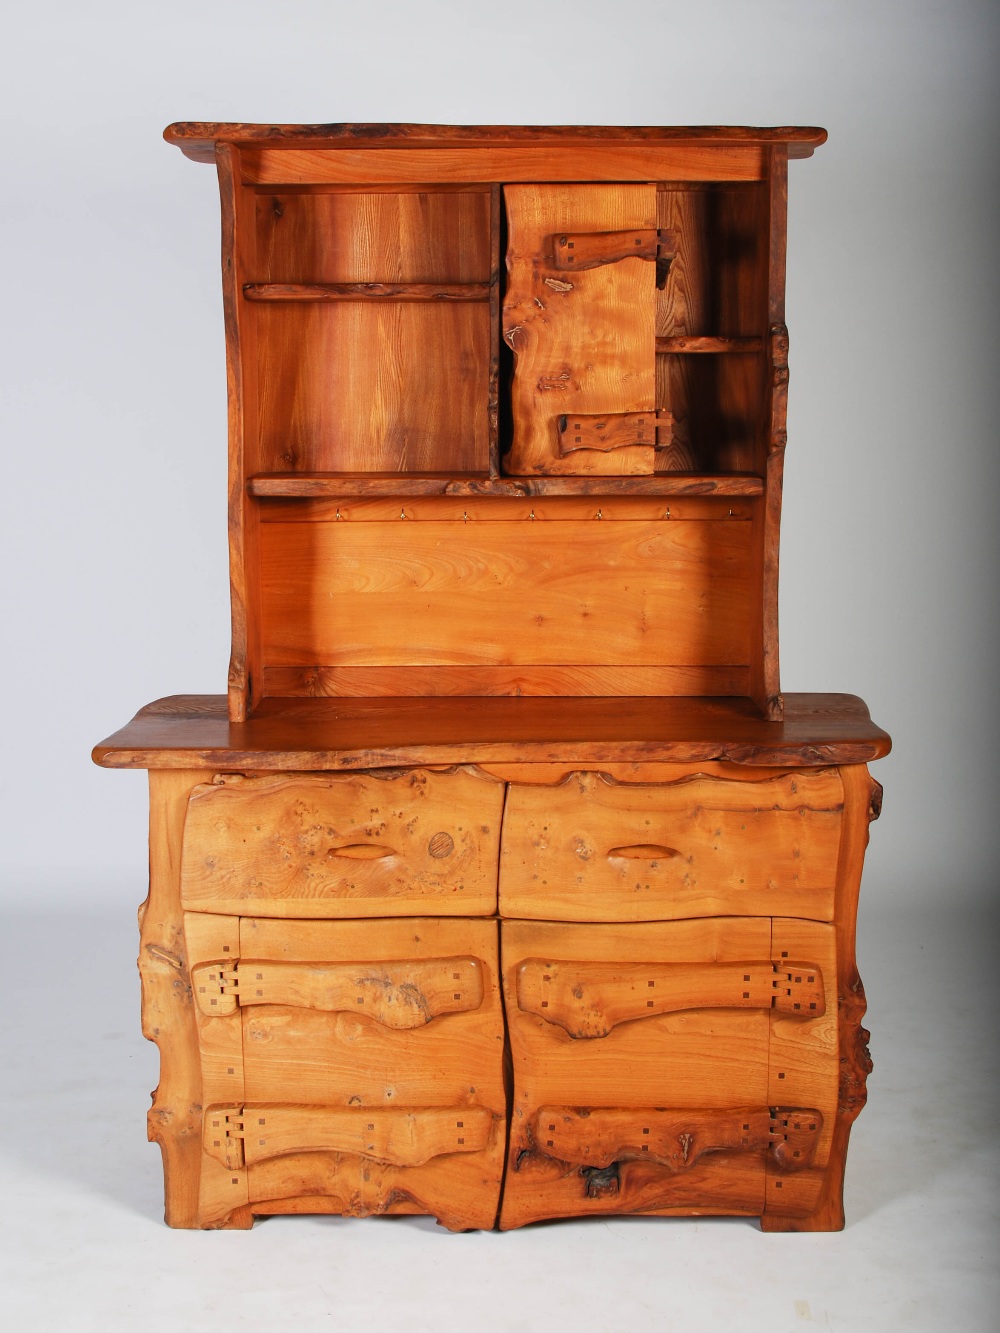 Tim Stead (1952-2000) - A burr elm dresser, the upper section with four open shelves and single